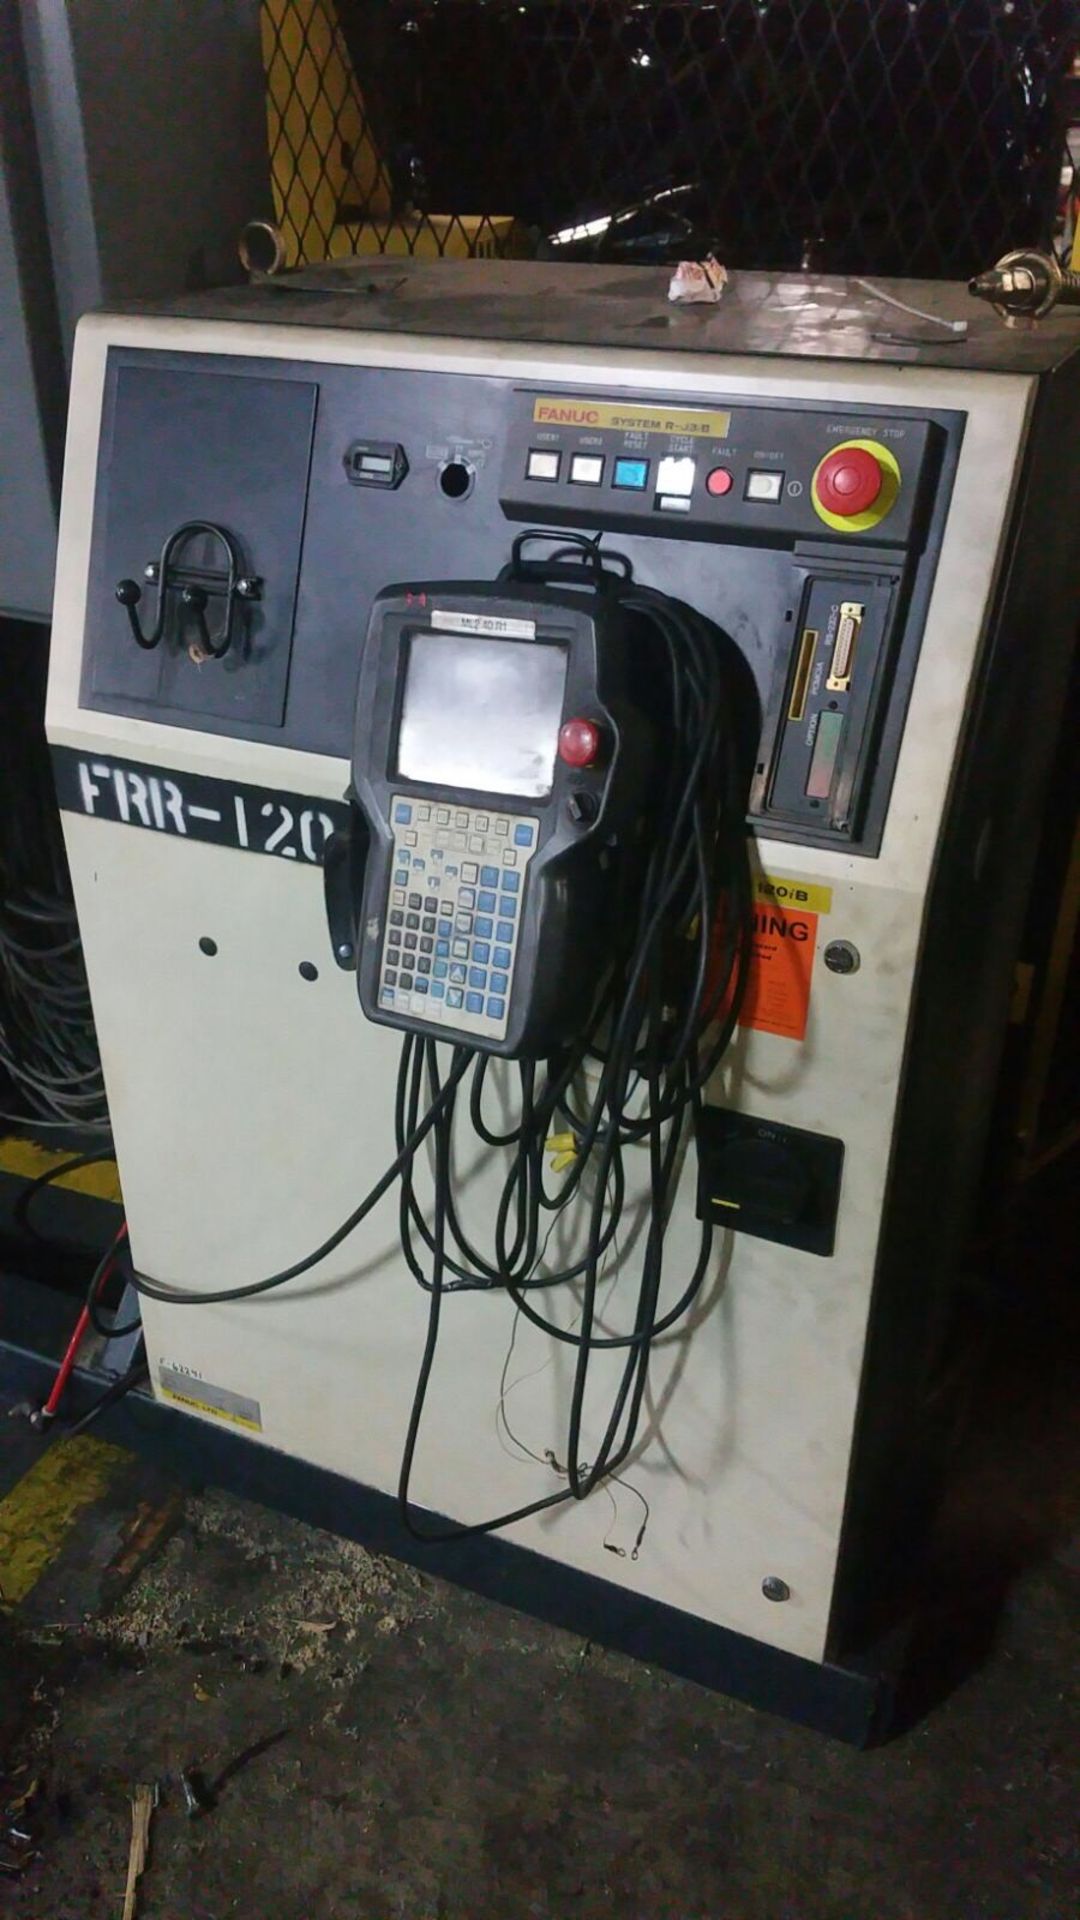 2005 FANUC ARCMATE 120iB W/R-J3iB CONTROLS, CABLES, TEACH PENDANT AND LINCOLN 455M POWER SUPPLY - Image 4 of 5